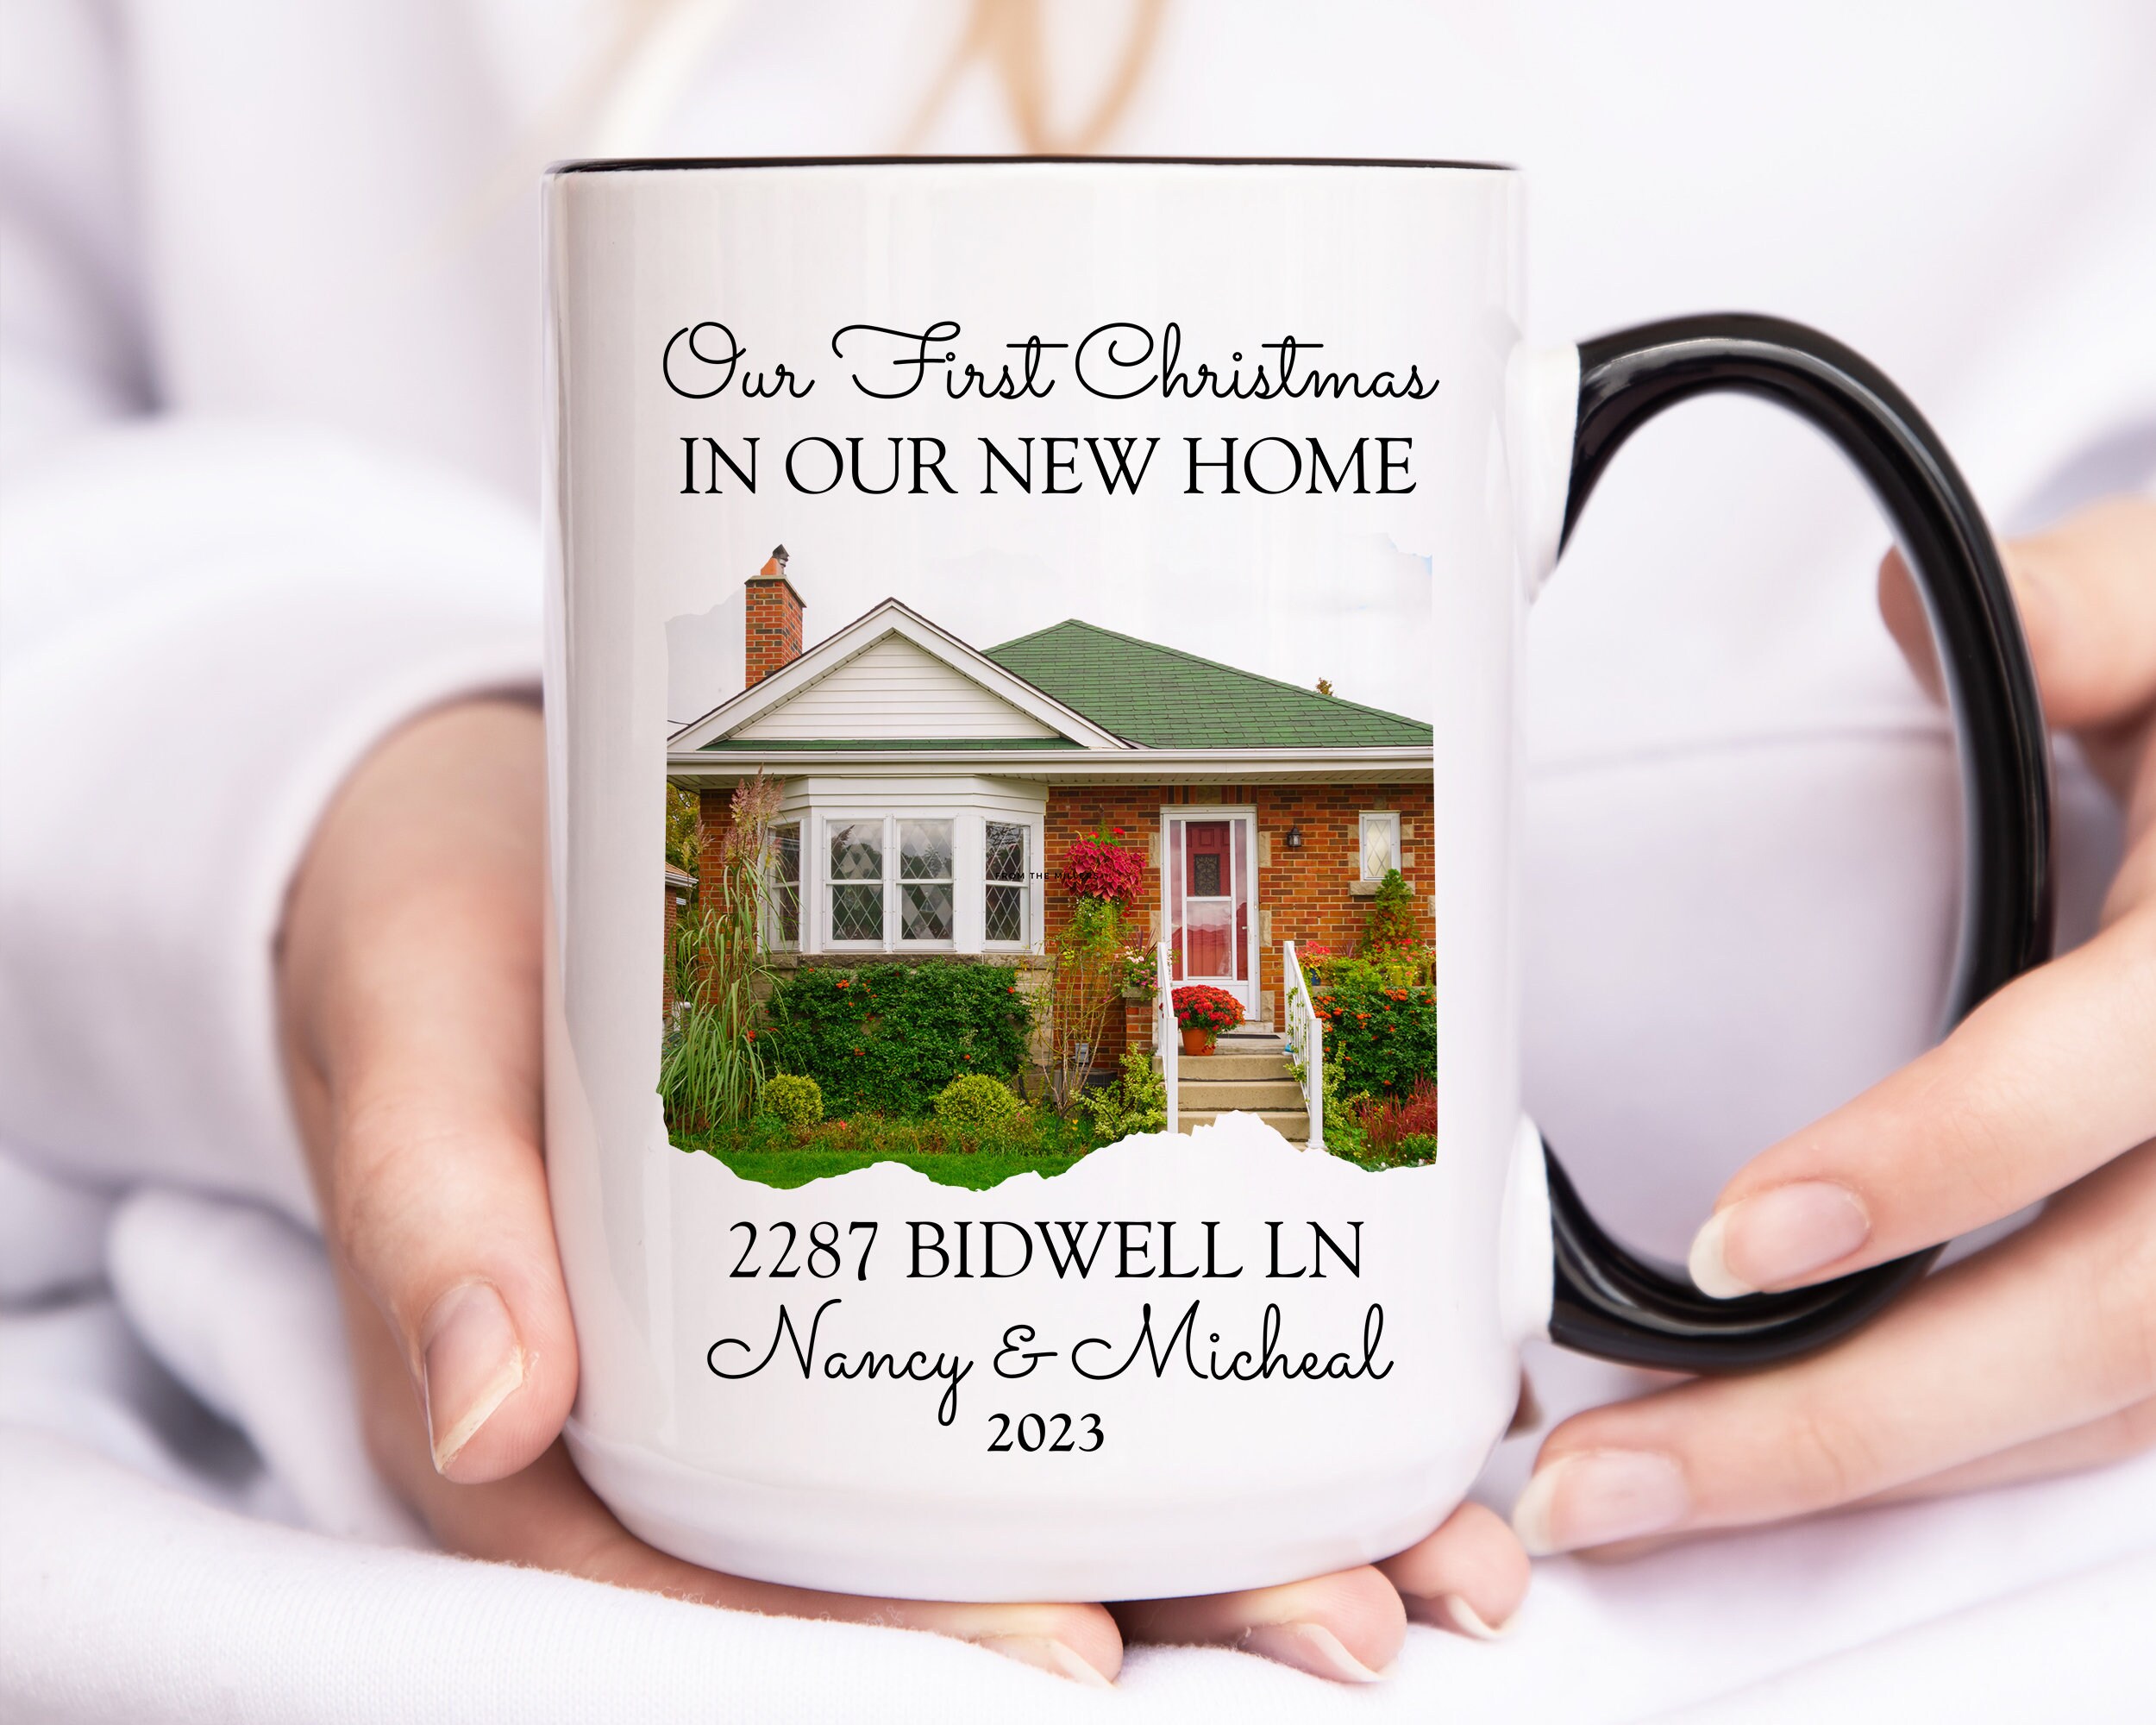 Small Business, Corporate Gifts, Logo Mugs, Client Gifts, Business